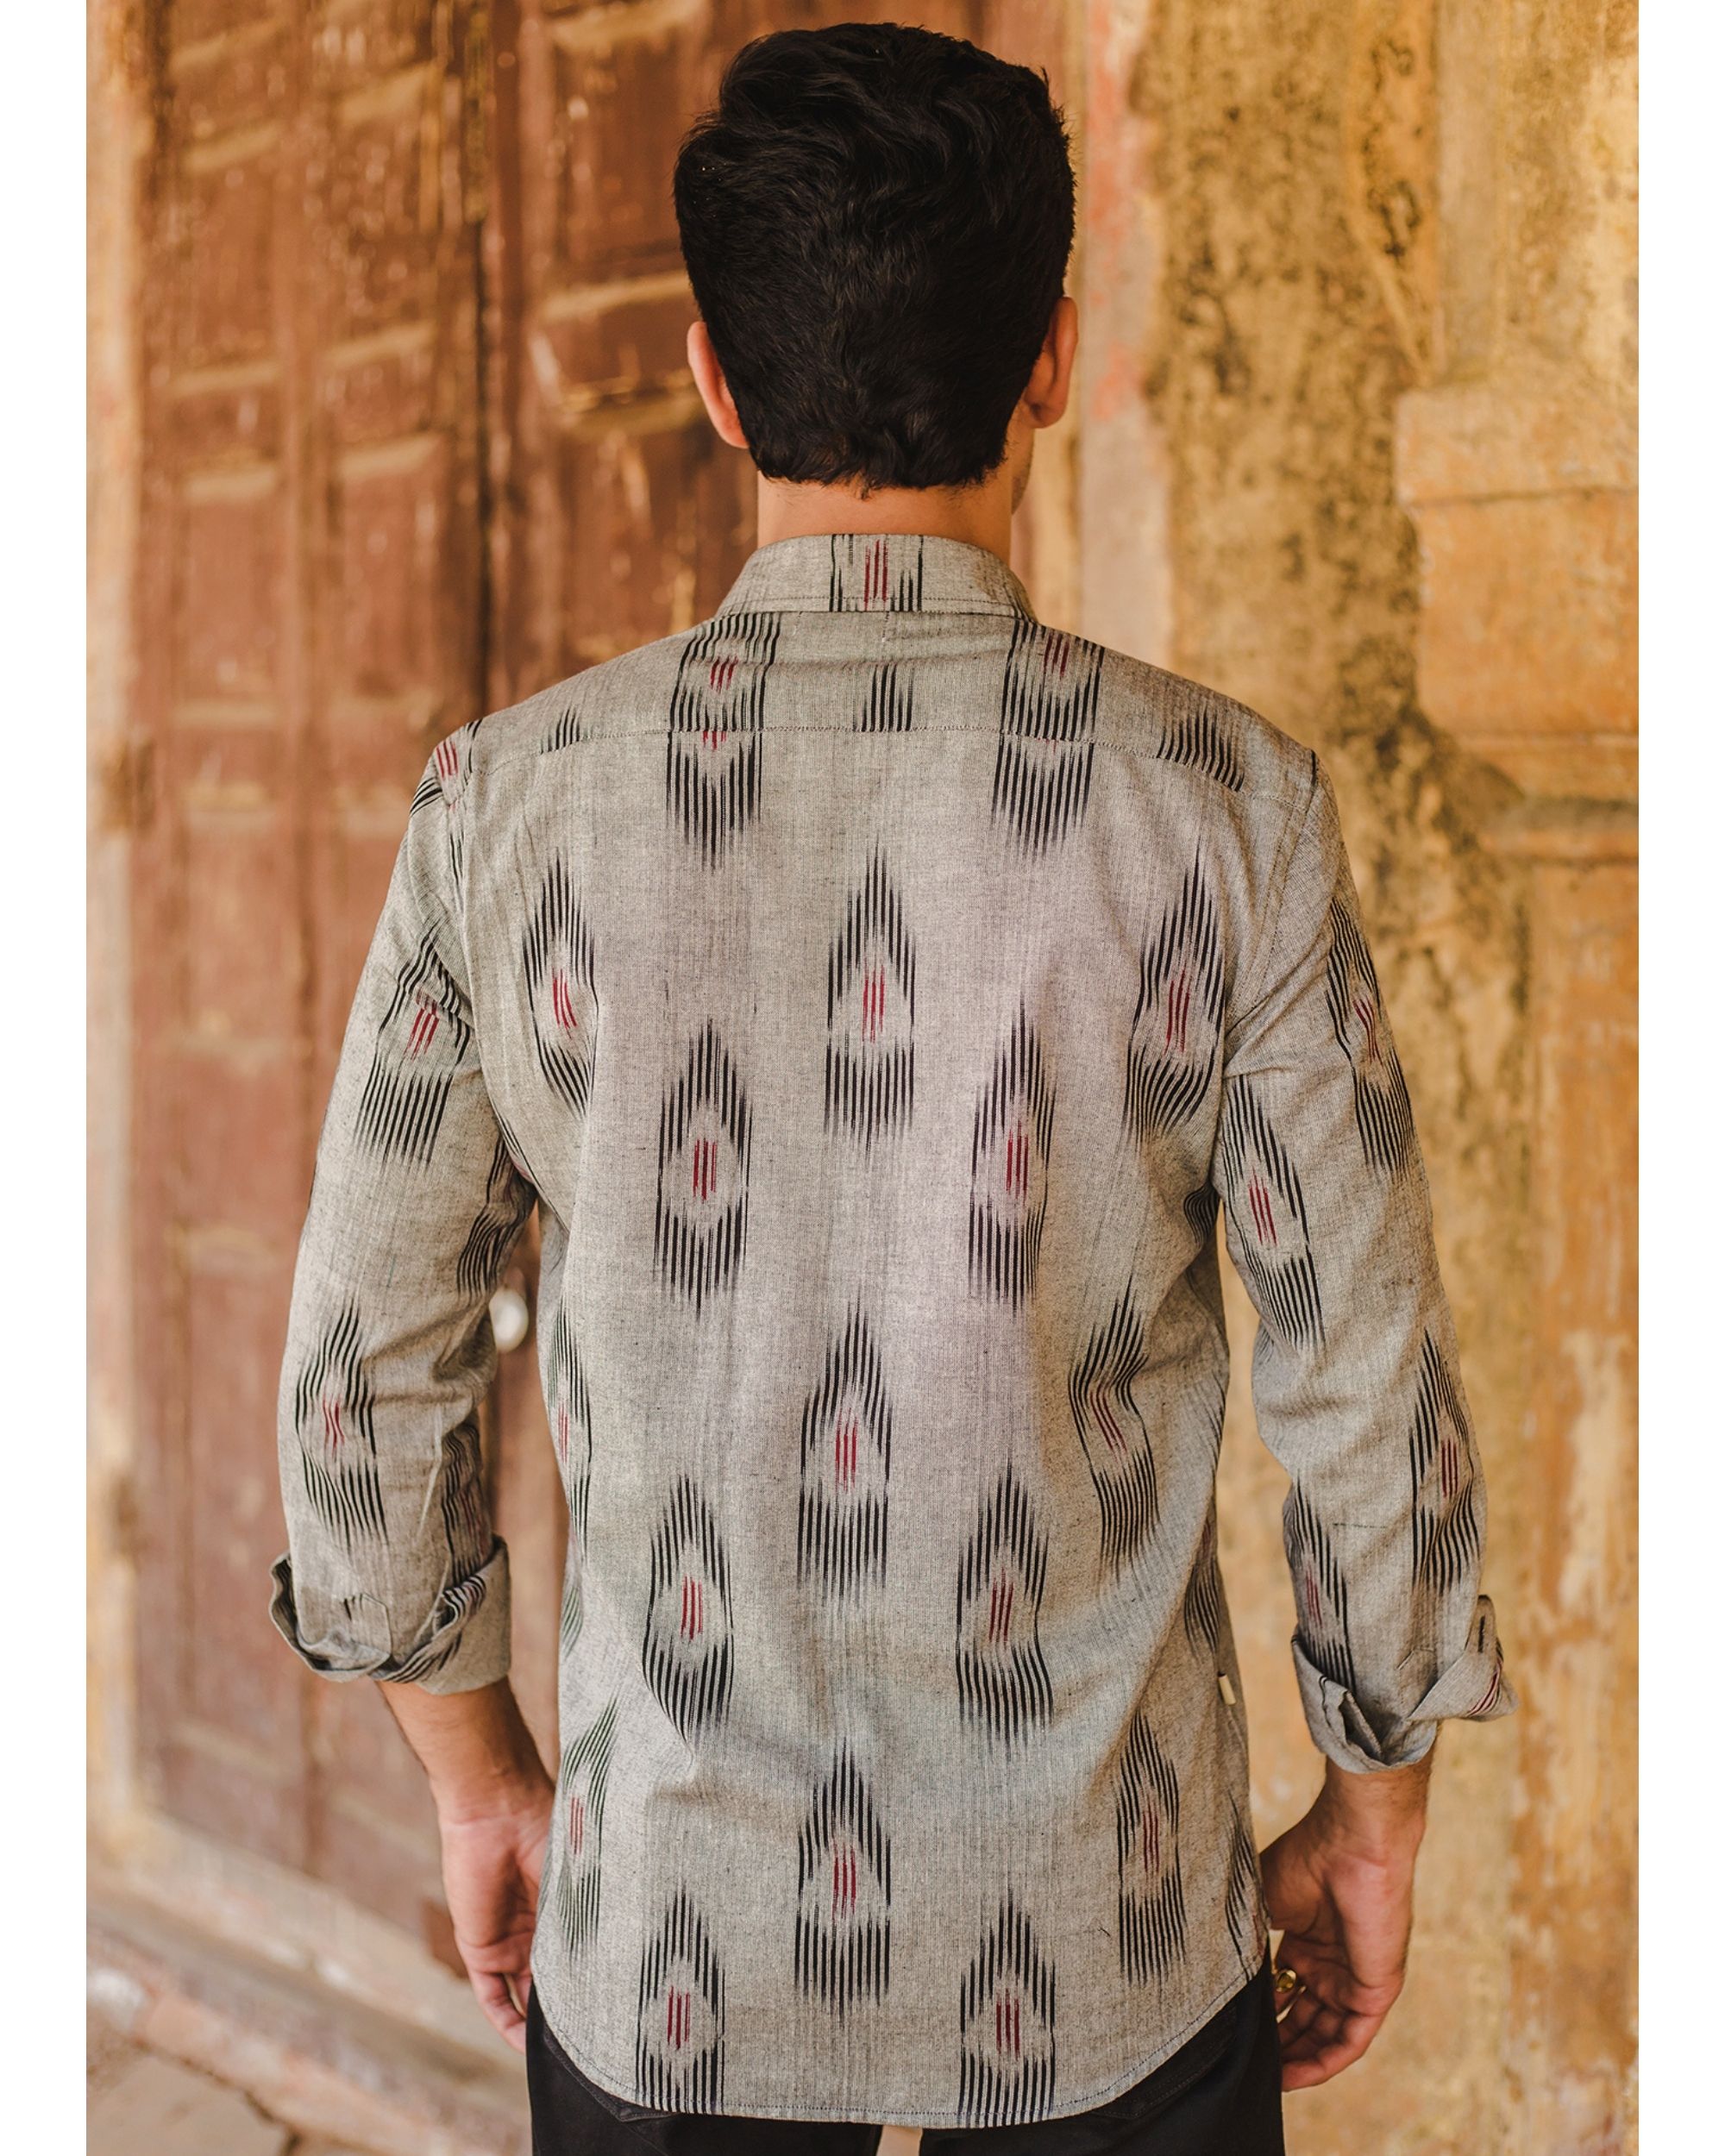 Grey and black ikat shirt by Prints Valley | The Secret Label